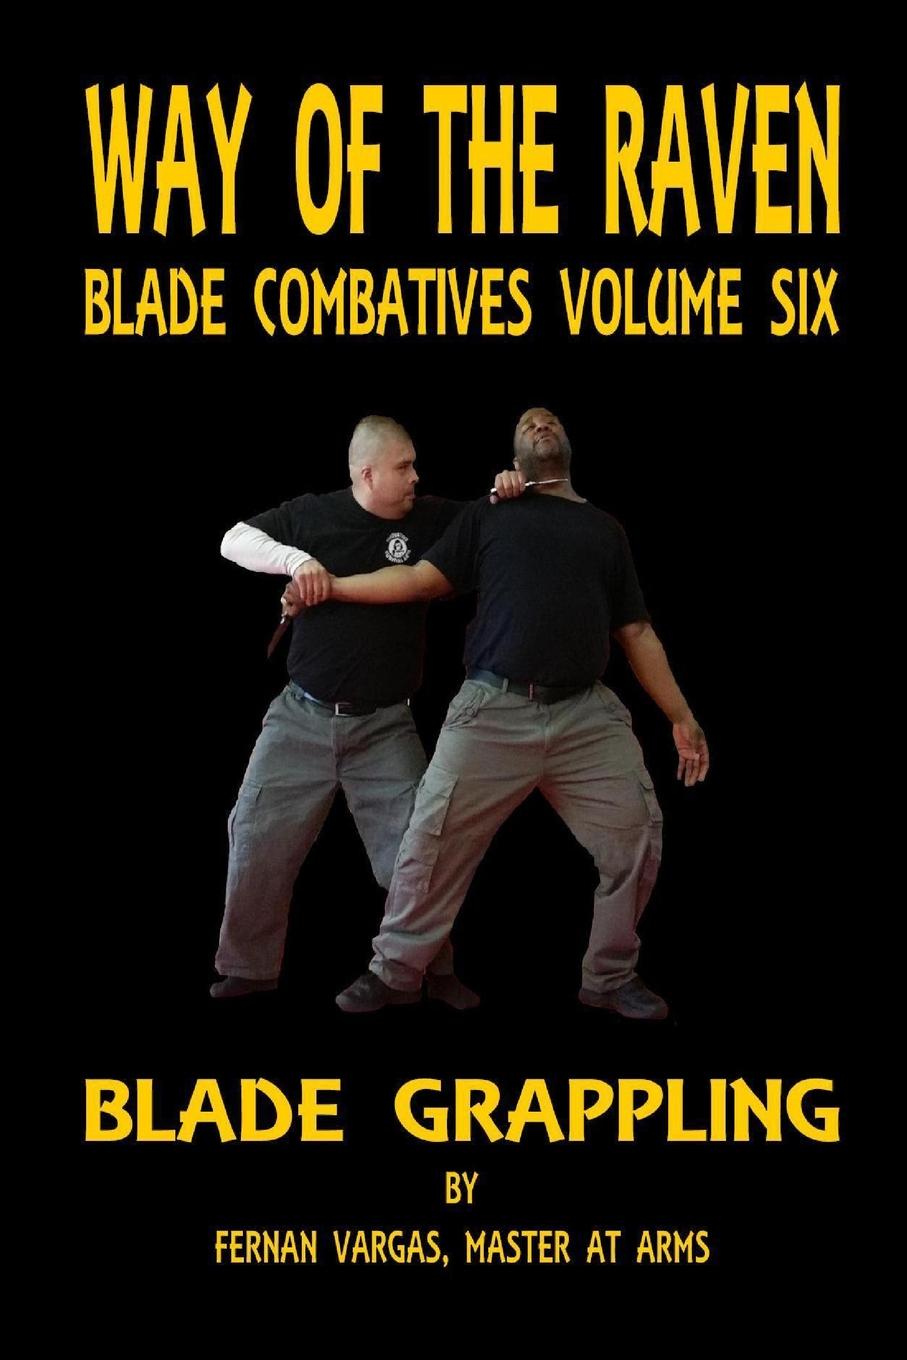 Way of the Raven Blade Combative Volume Six. Blade Grappling